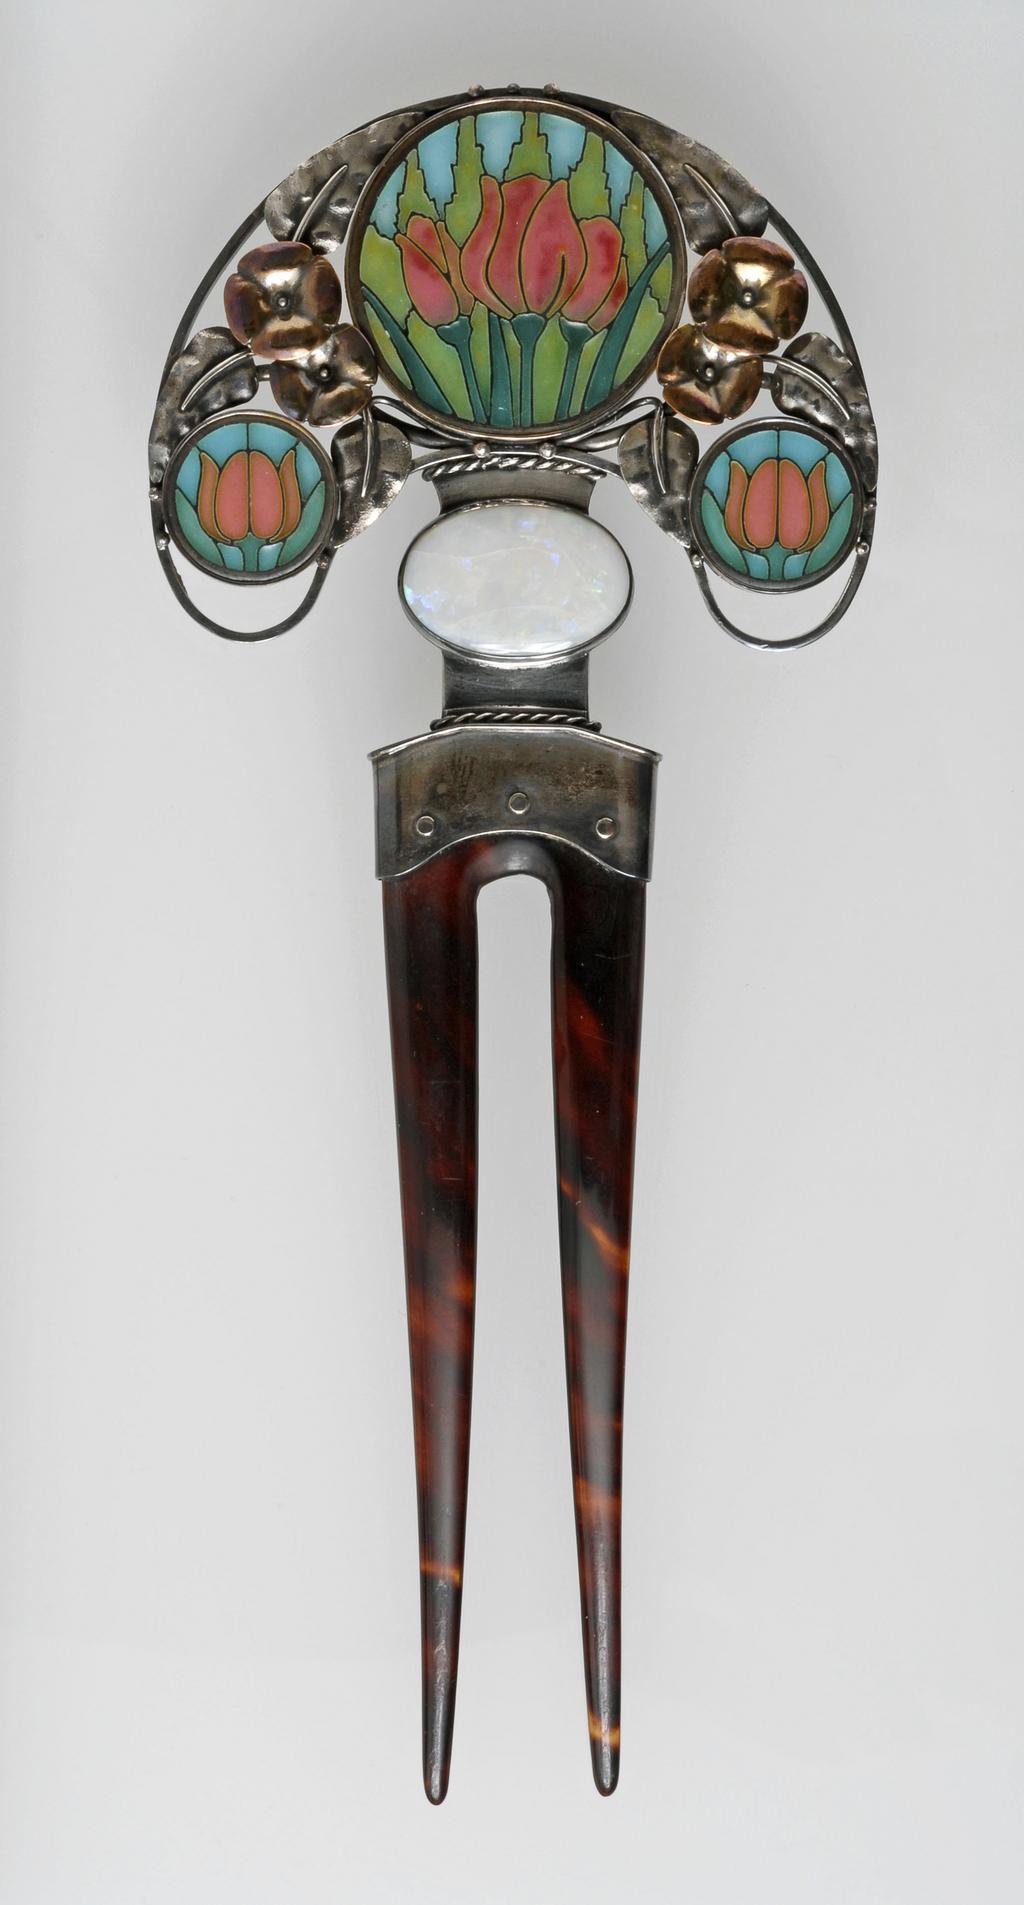 An image of Hair ornament. Wilson, Henry (British, 1864-1934), attributed. Silver and gold, inset with turquoise, pink, pale and dark green plique-à-jour roundels of tulips and an oval opal, mounted on a tortoiseshell two-pronged hair pin. 1900-1905. English. Art Nouveau. Acquisition Credit: Given by Mrs J. Hull Grundy.